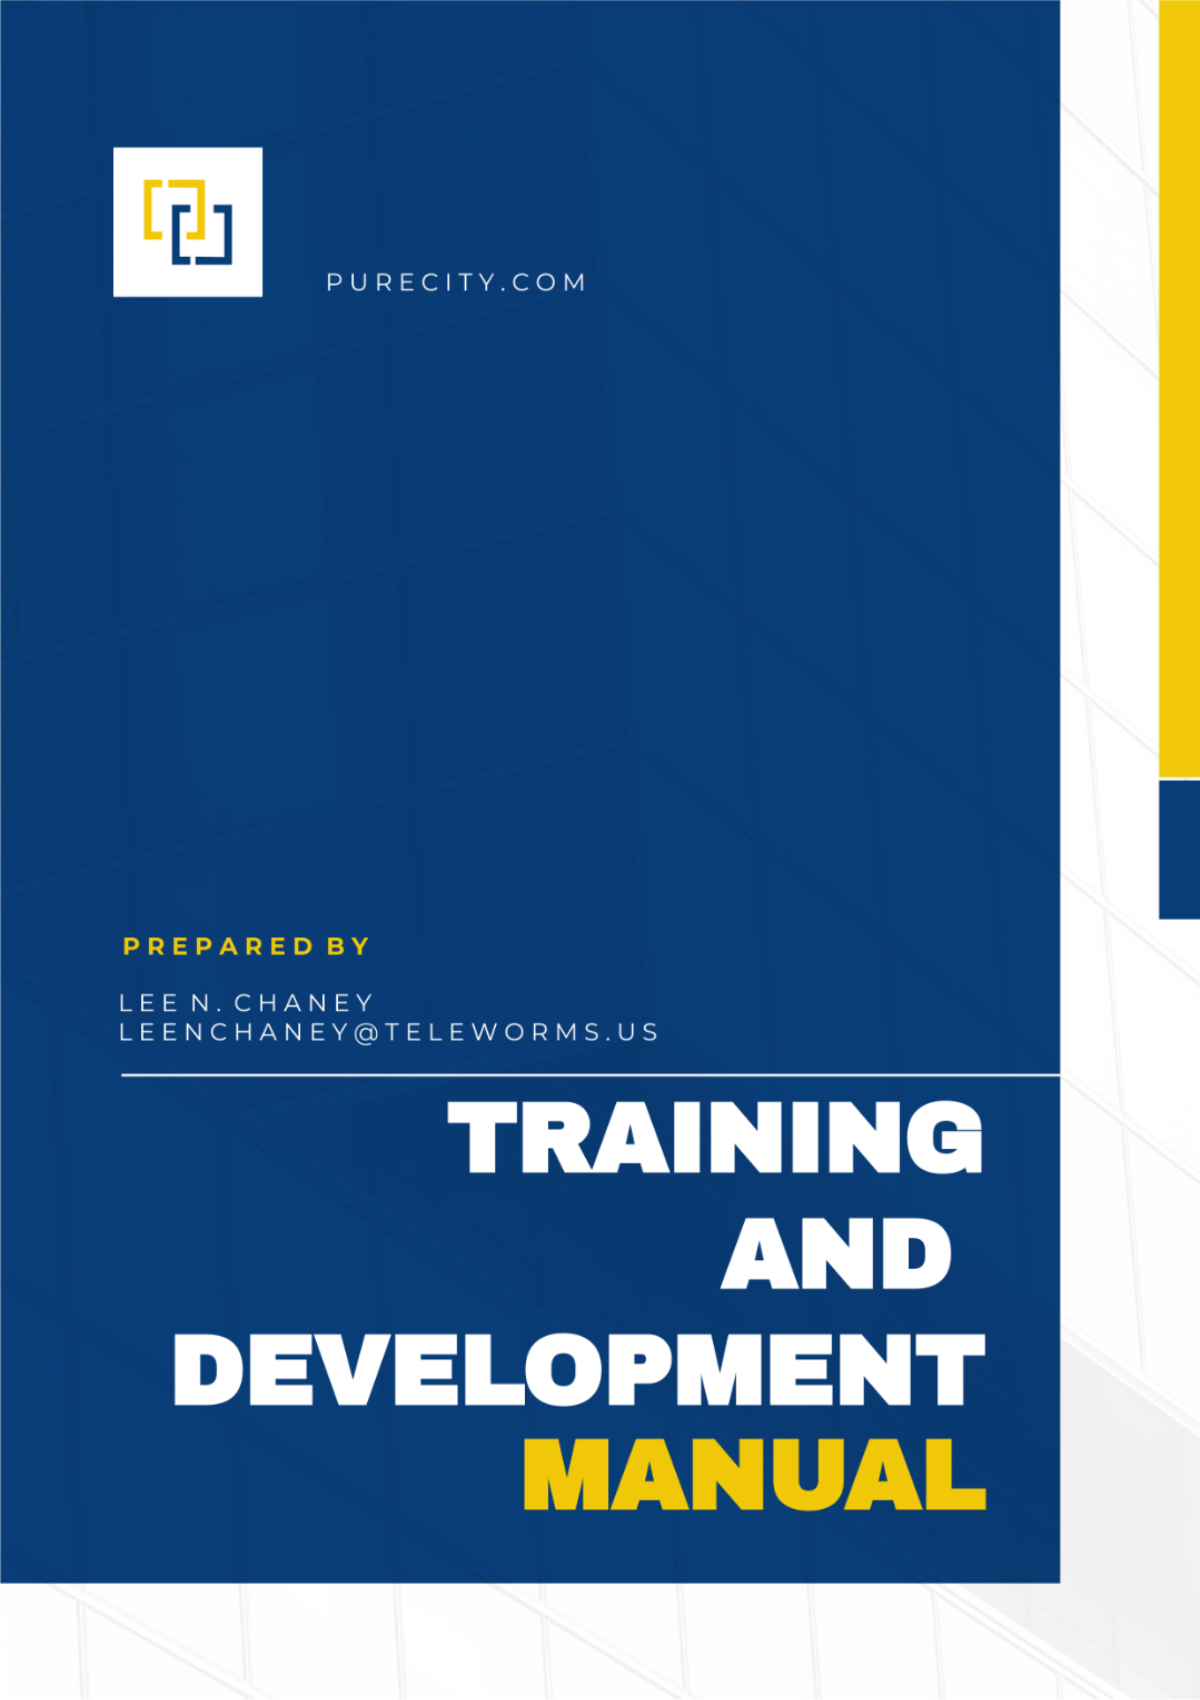 Free Training and Development Manual Template